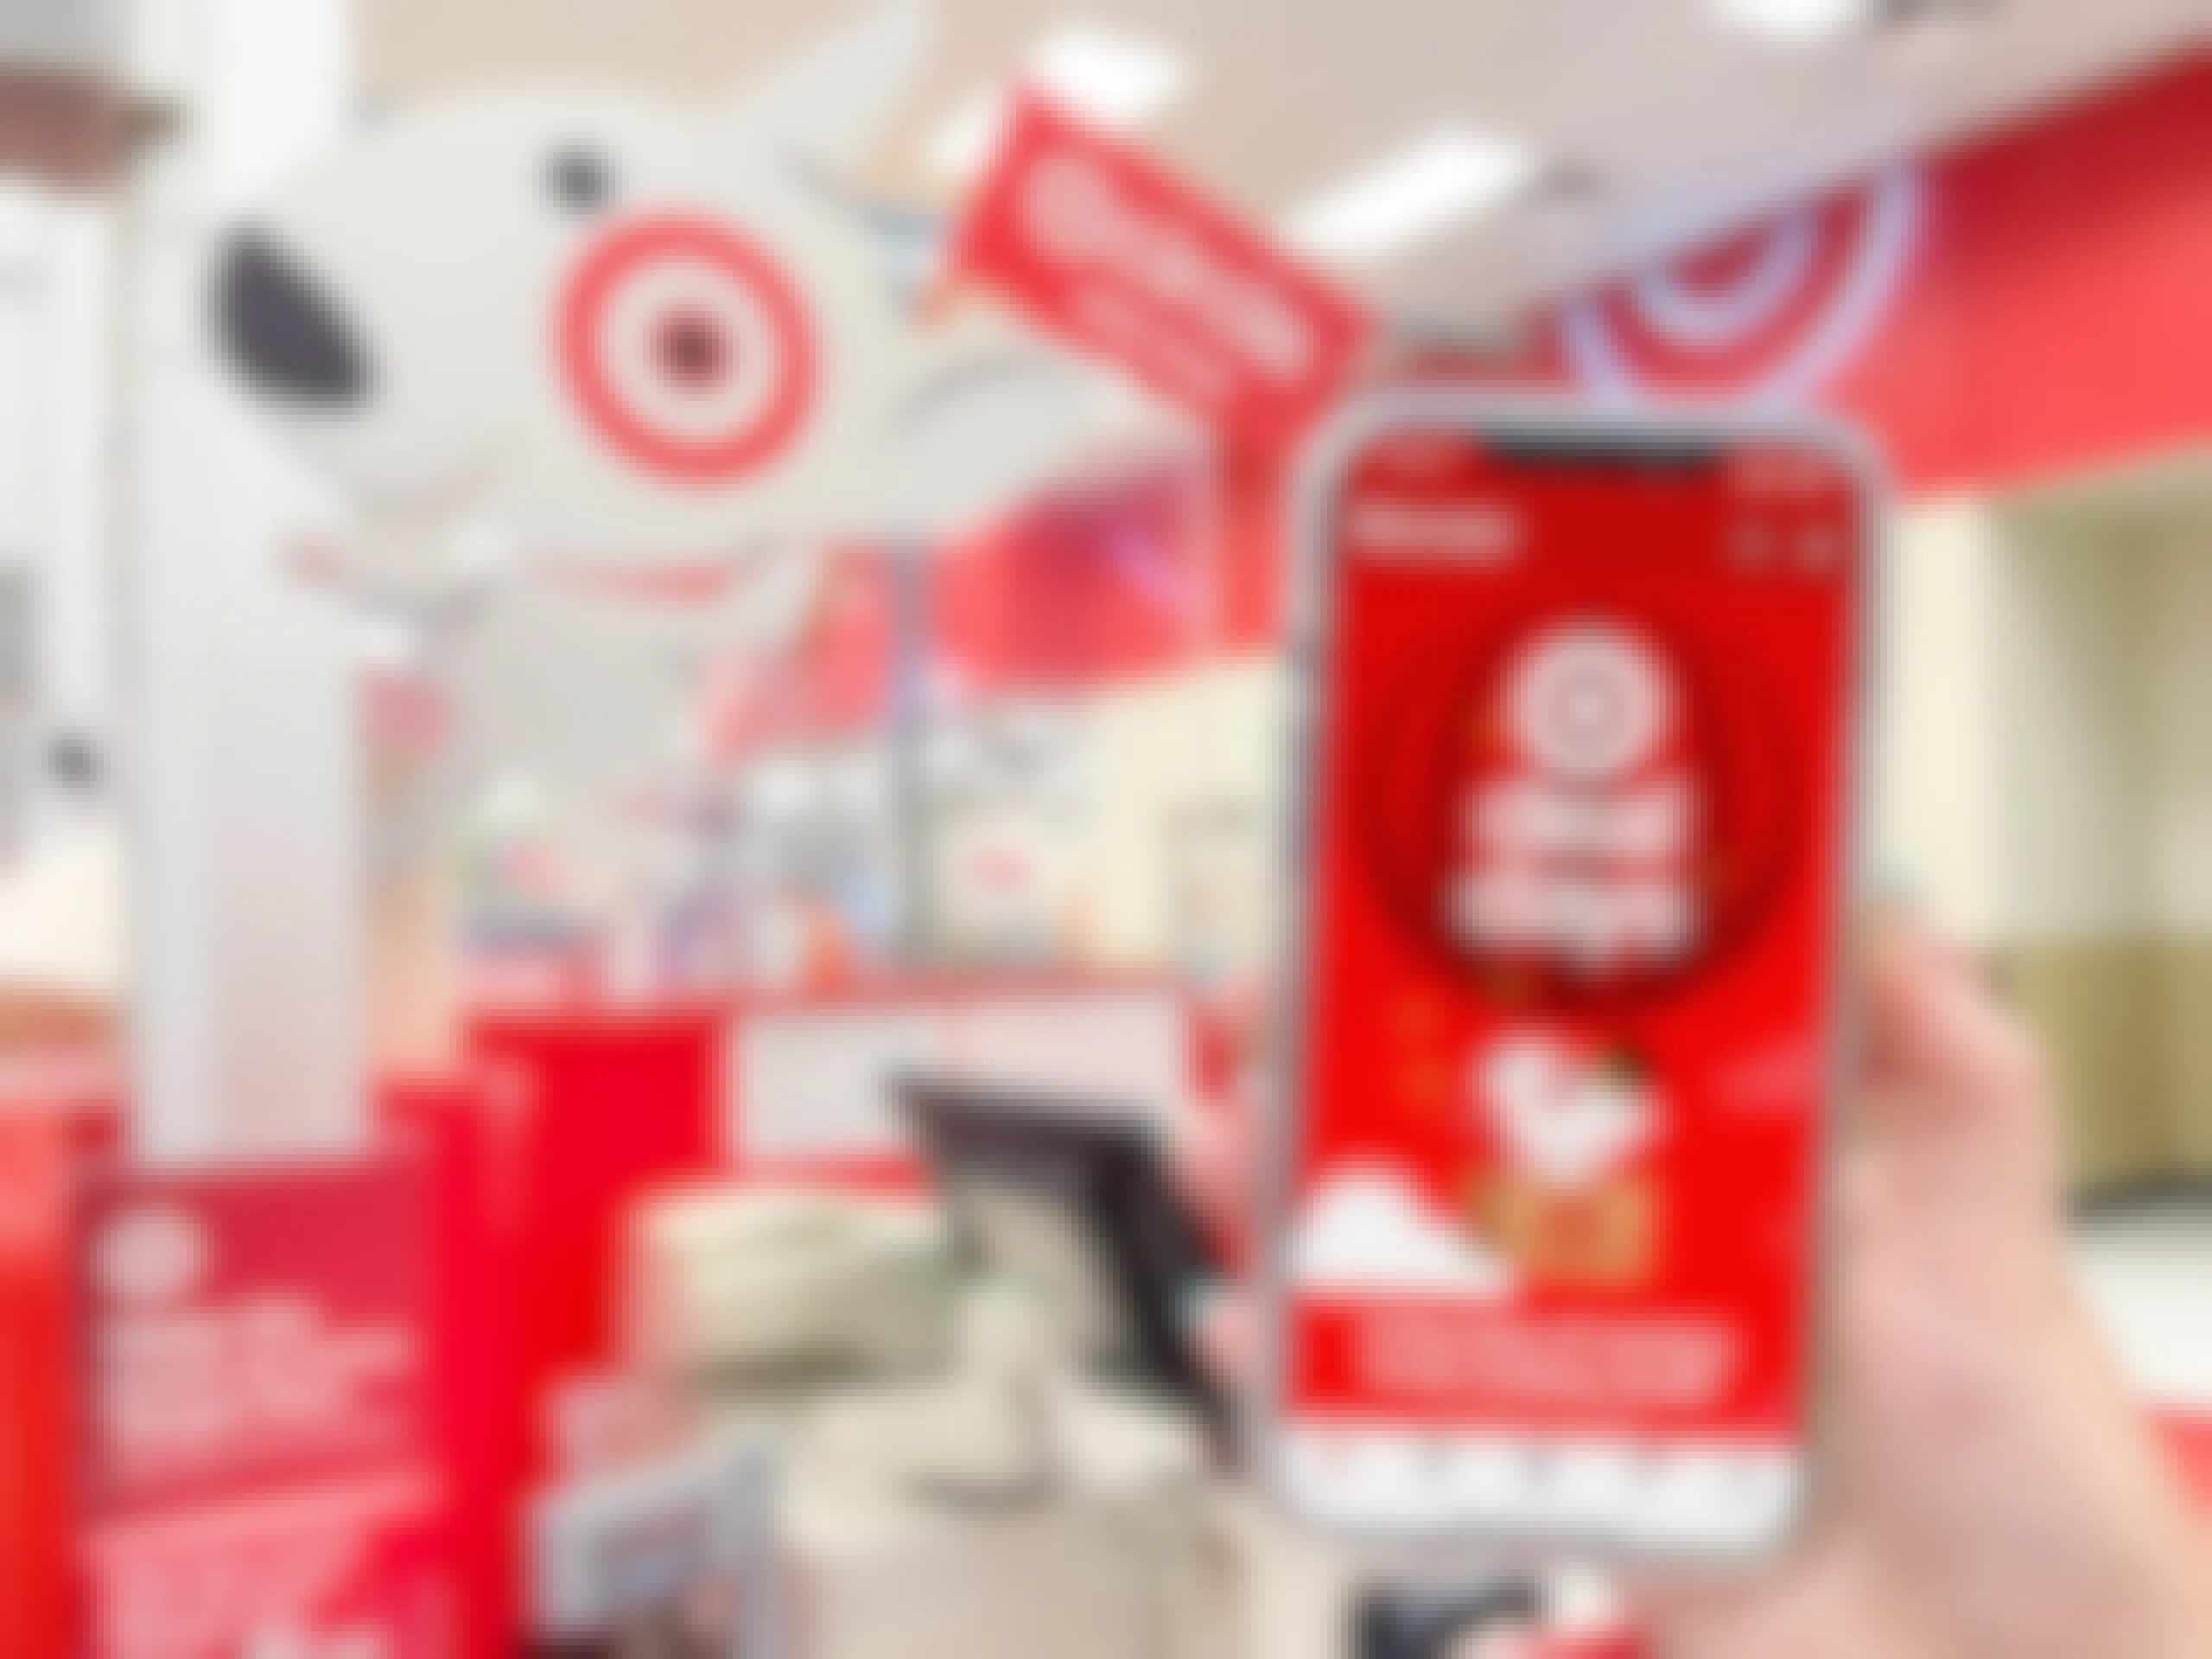 A person's hand holding up an iPhone displaying the Target app's Deal Days page in front of a Target checkout counter.